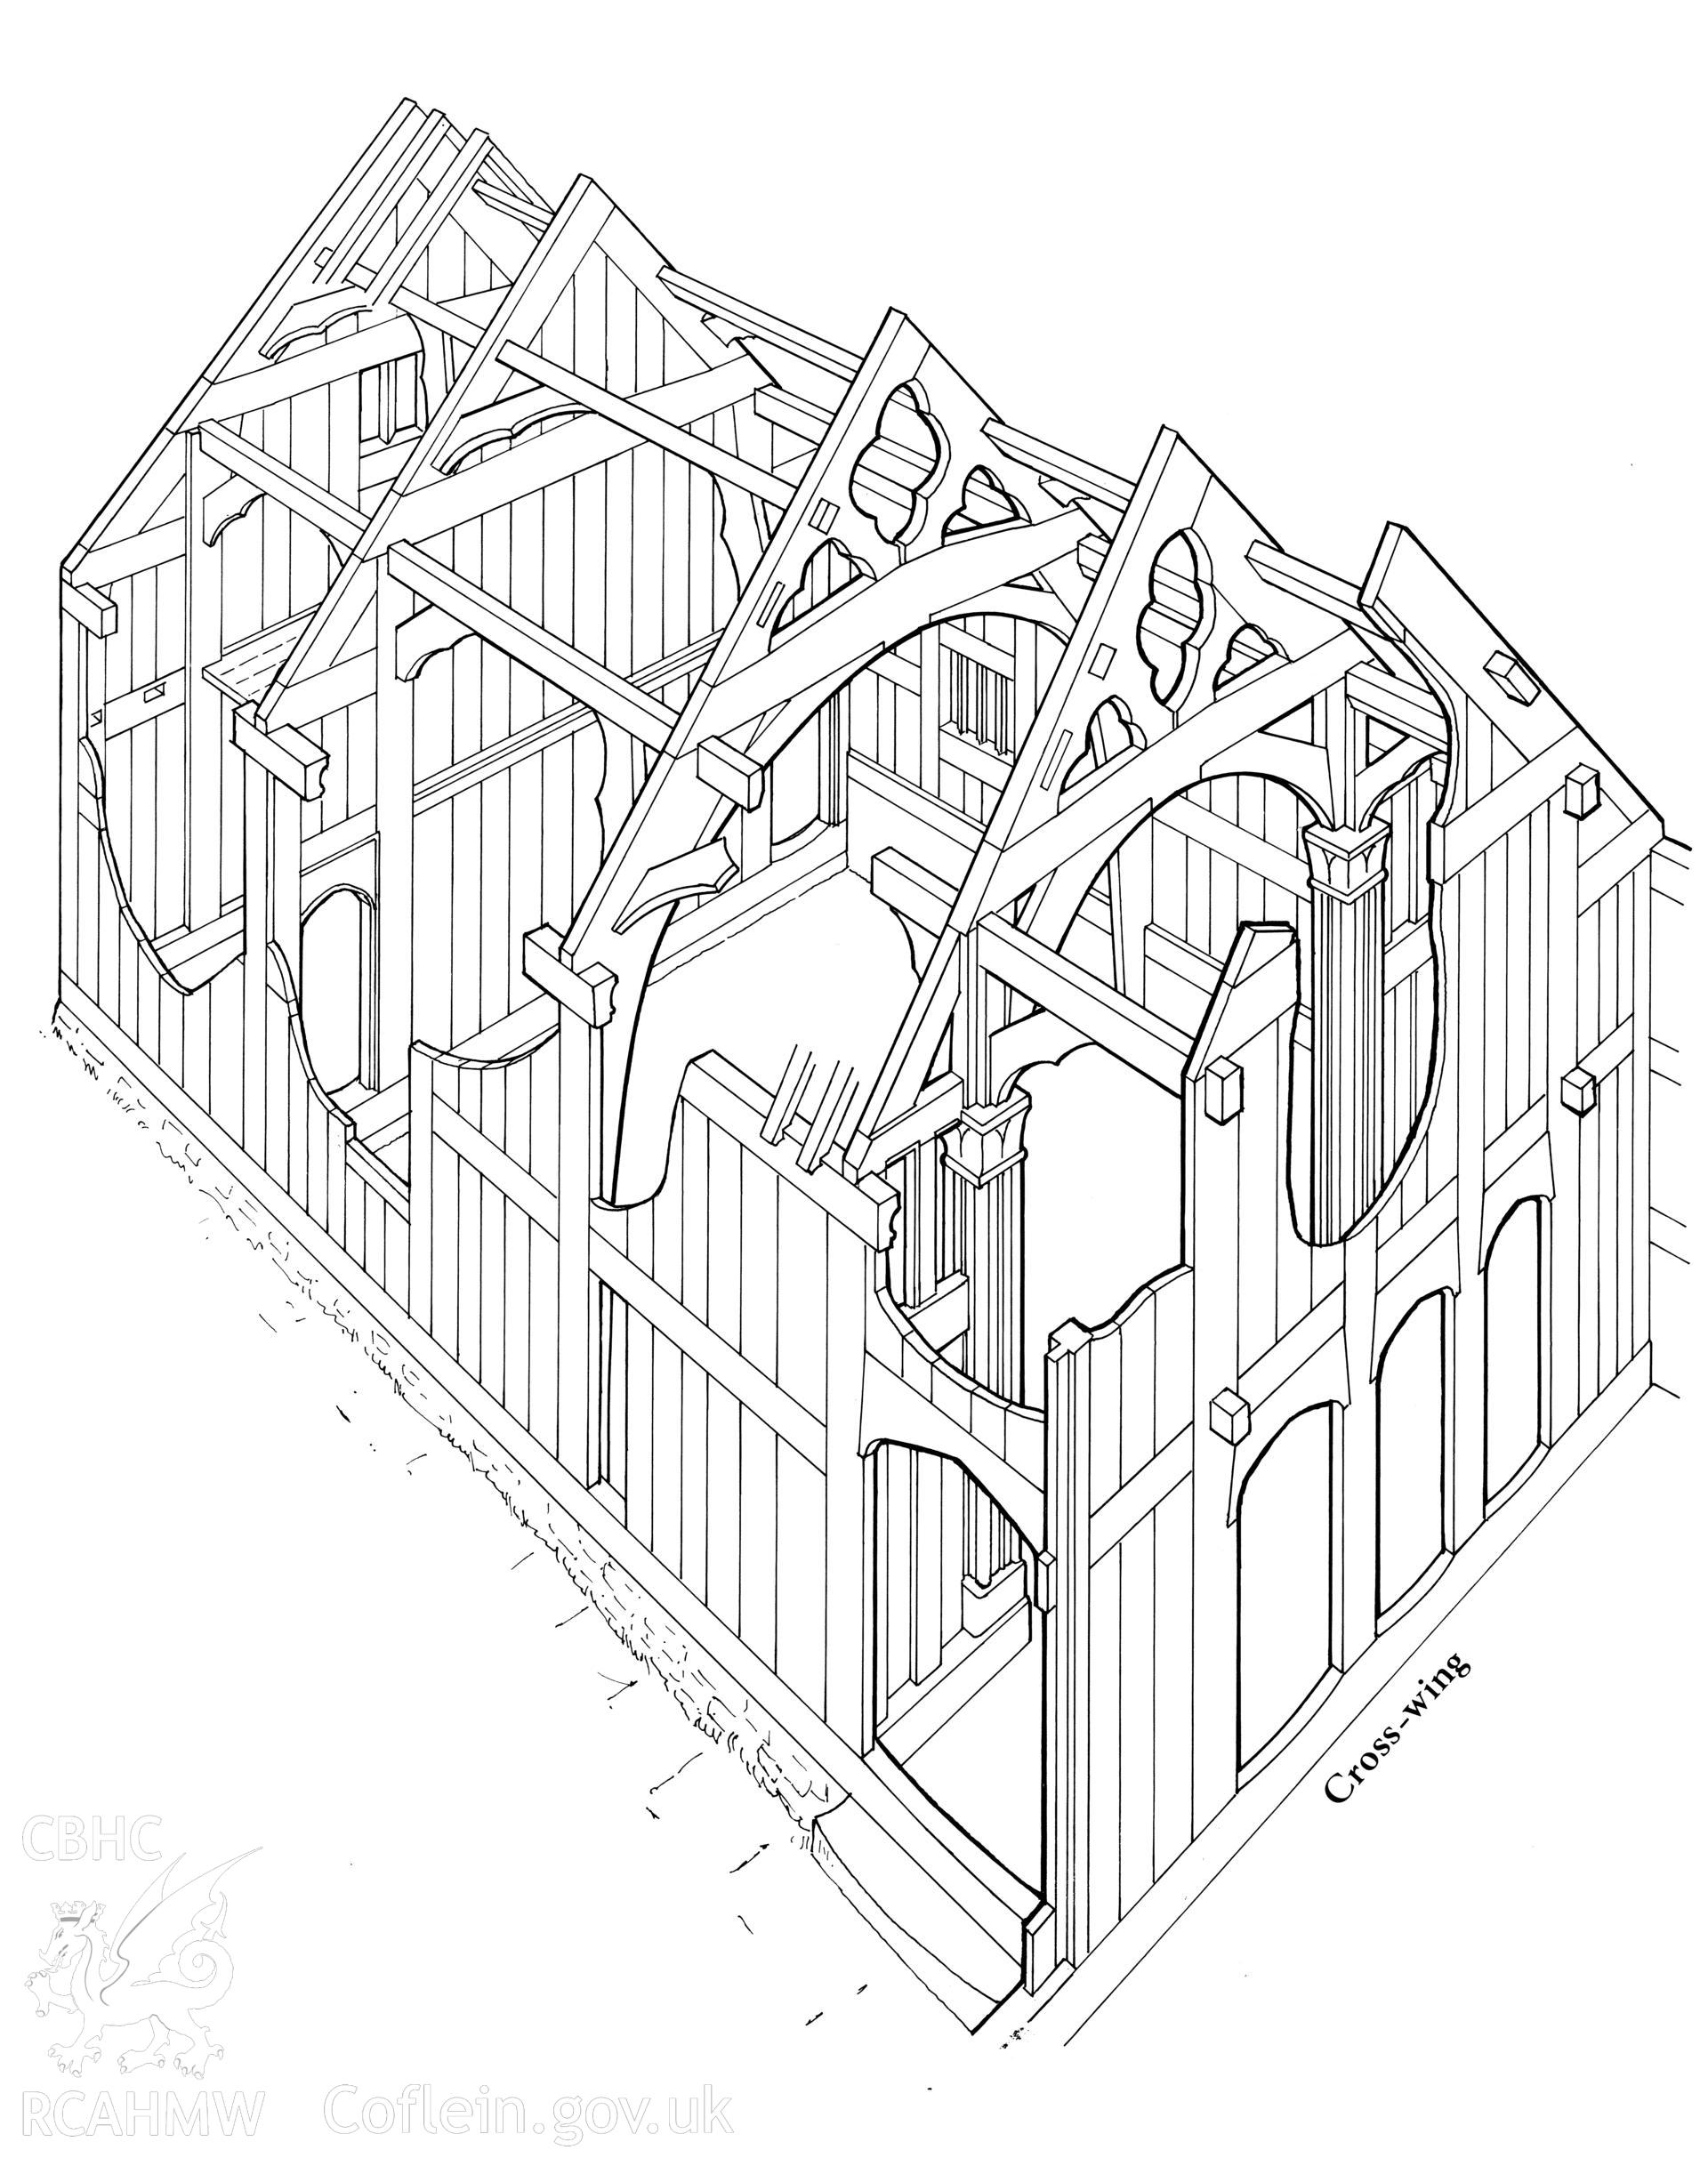 RCAHMW drawing showing cutaway of Pen y Bryn, Llansilin, published in Houses of the Welsh Countryside, fig 48.